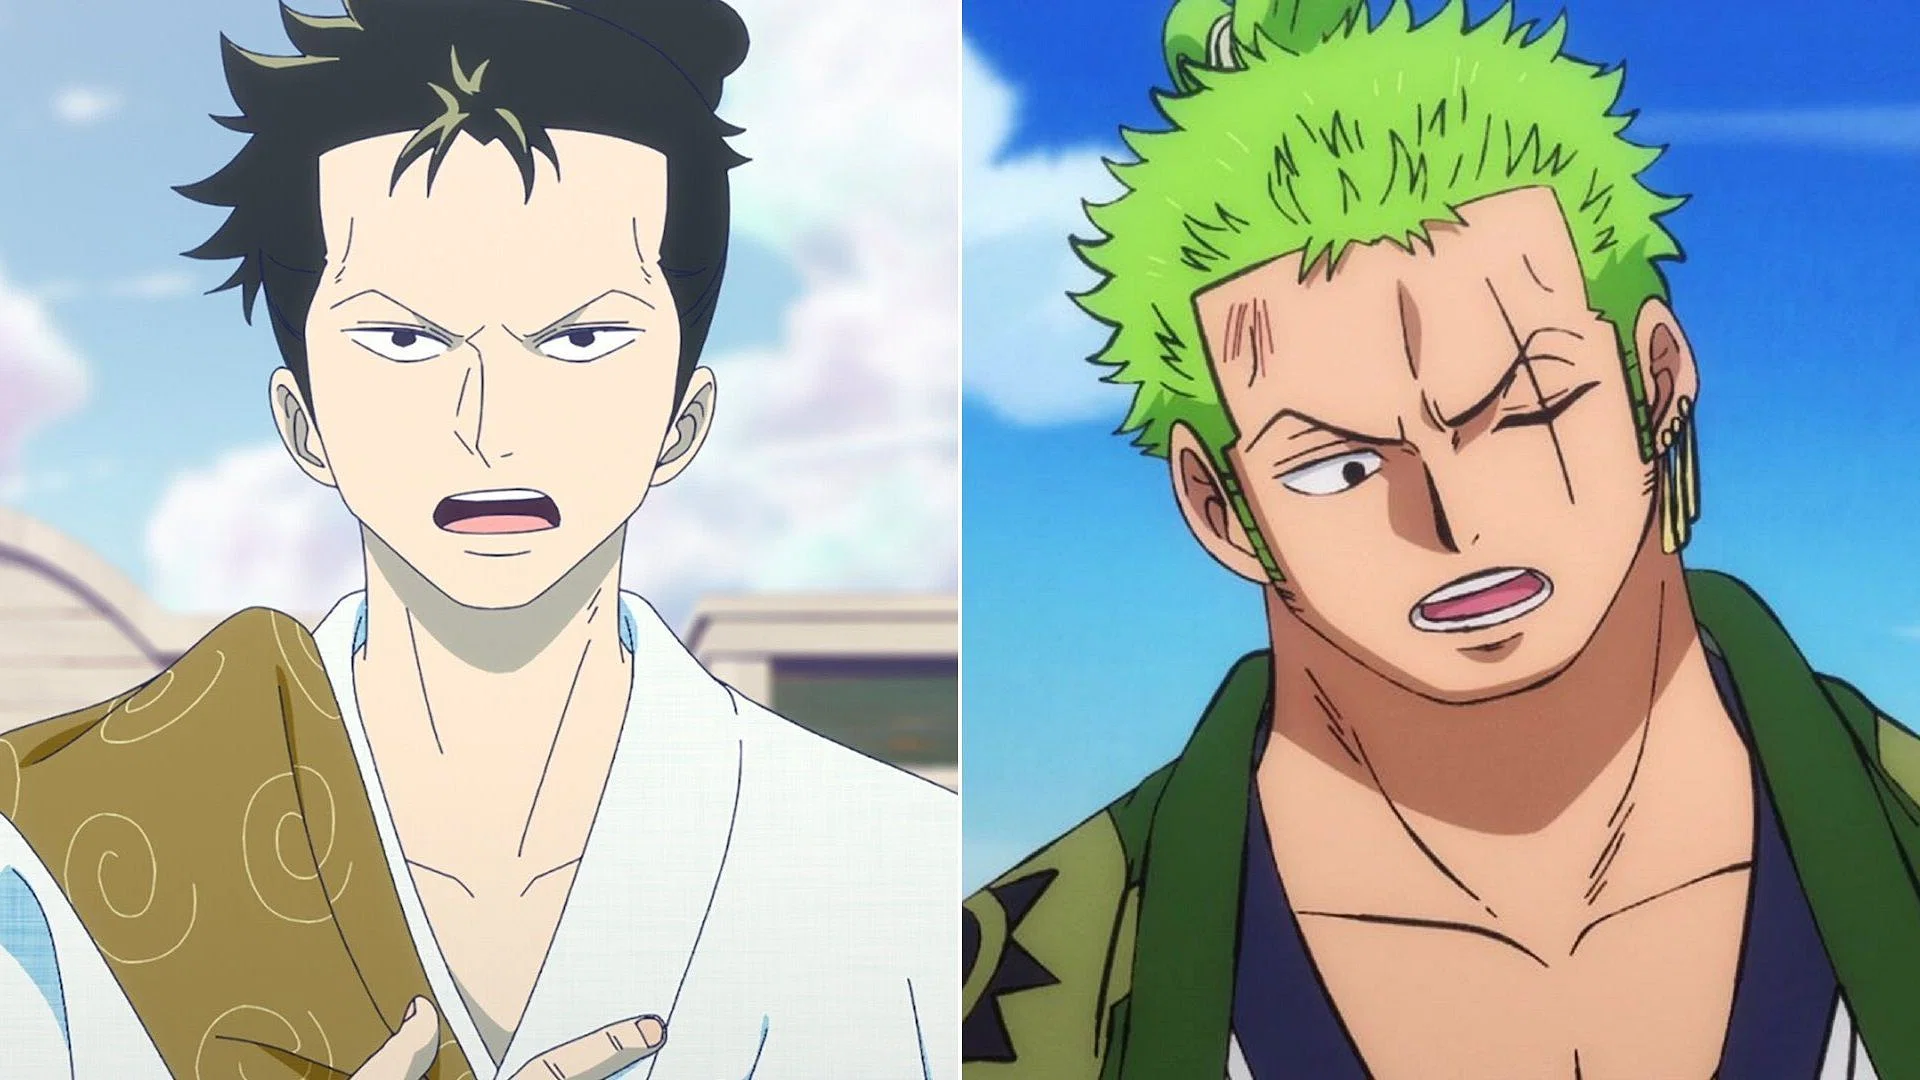 Ryuma and Zoro: The Connection Between Two Legendary Swordsmen